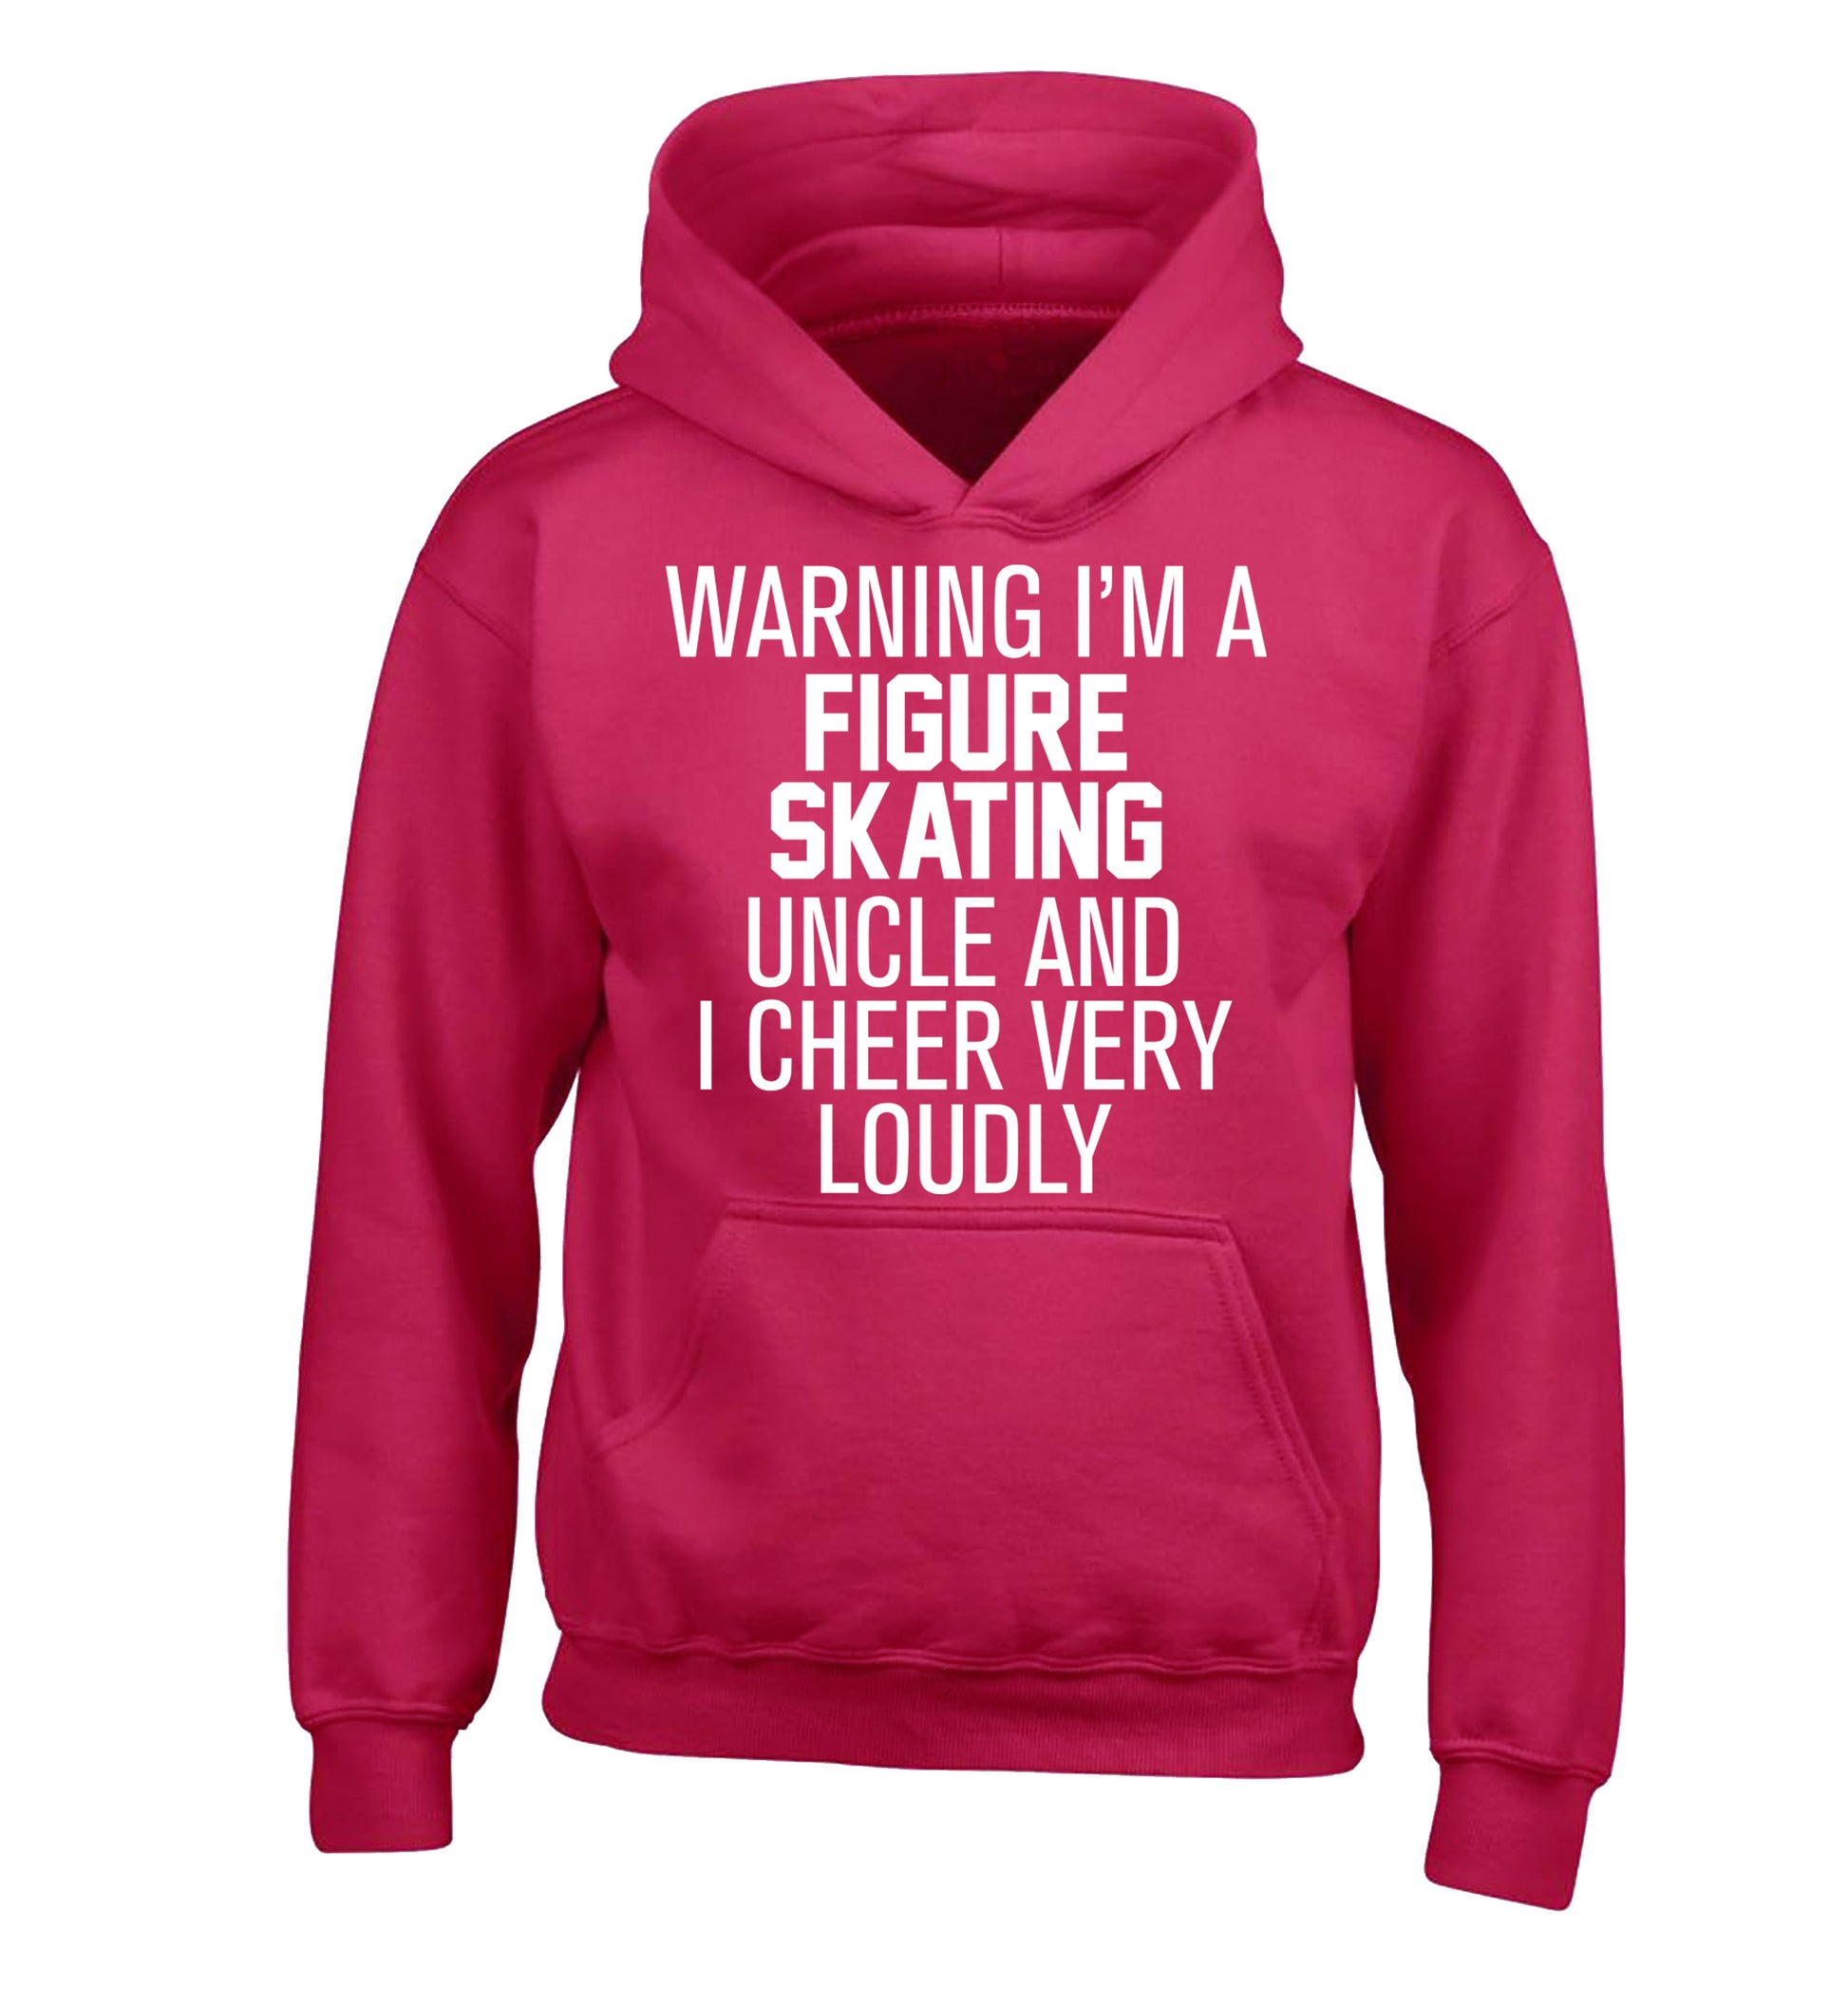 Warning I'm a figure skating uncle and I cheer very loudly children's pink hoodie 12-14 Years